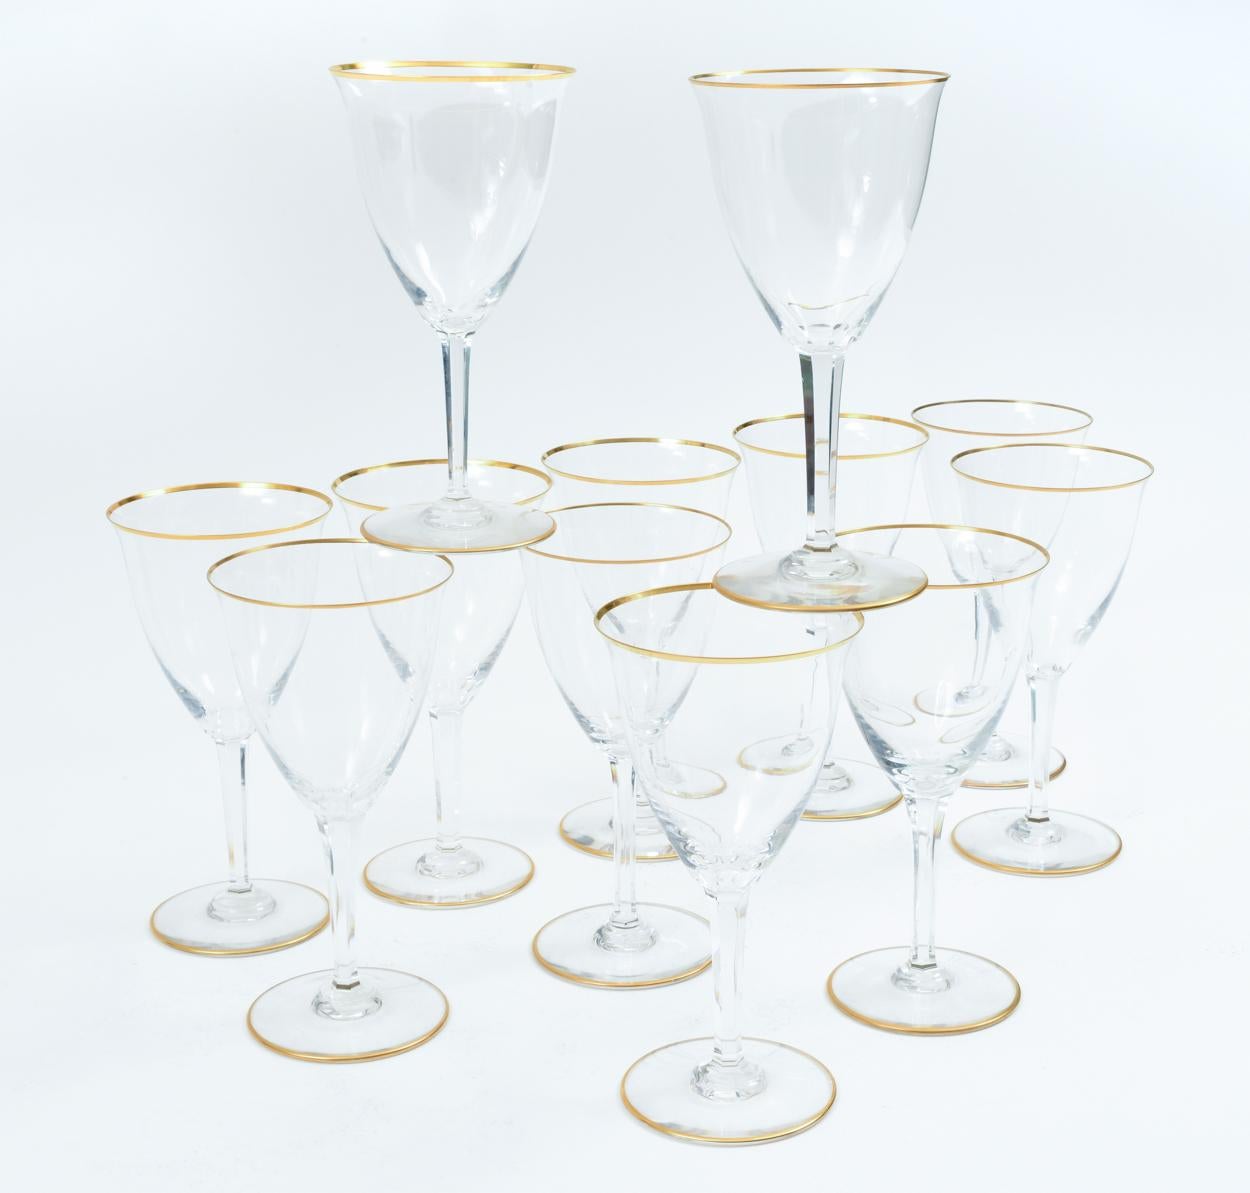 Vintage Baccarat crystal barware / tableware set of 12 wine / water glasses with gold trimmed top and base. Maker's mark undersigned on each glass. Excellent vintage condition. Each glass measure 7.5 inches tall x 4 inches diameter.